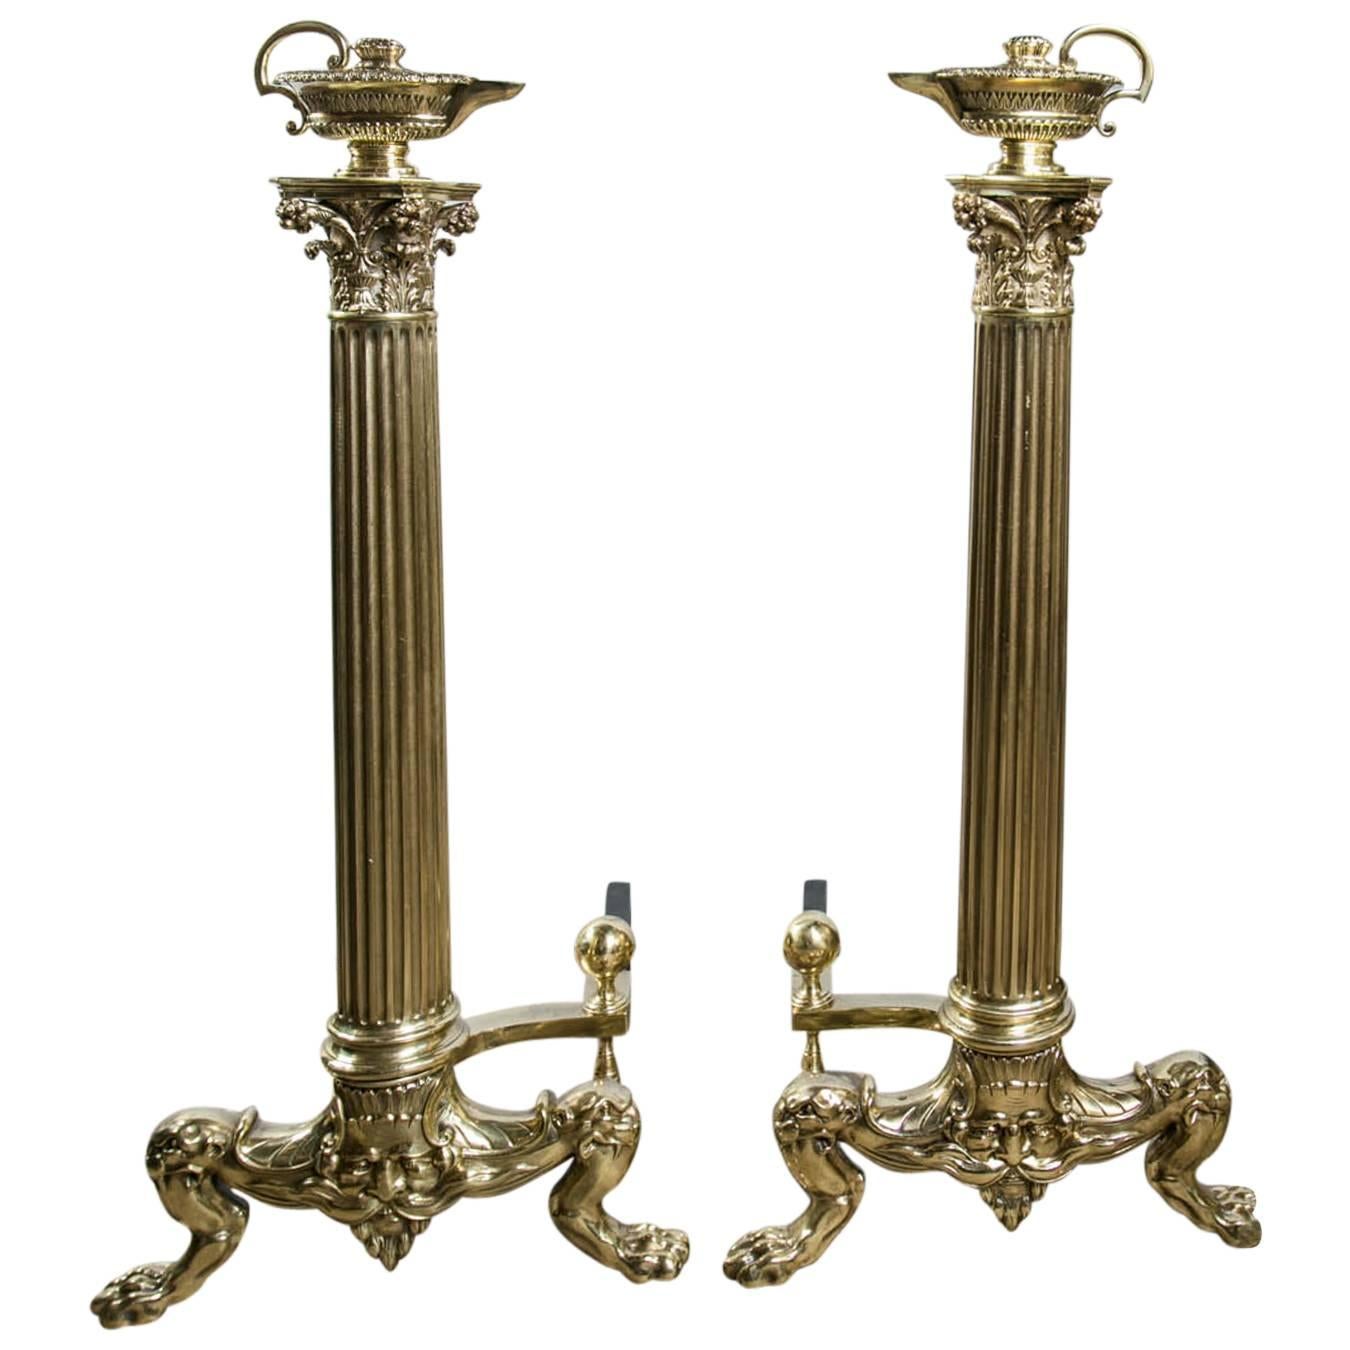 Tall Classical Pair of Polished Brass Andirons For Sale